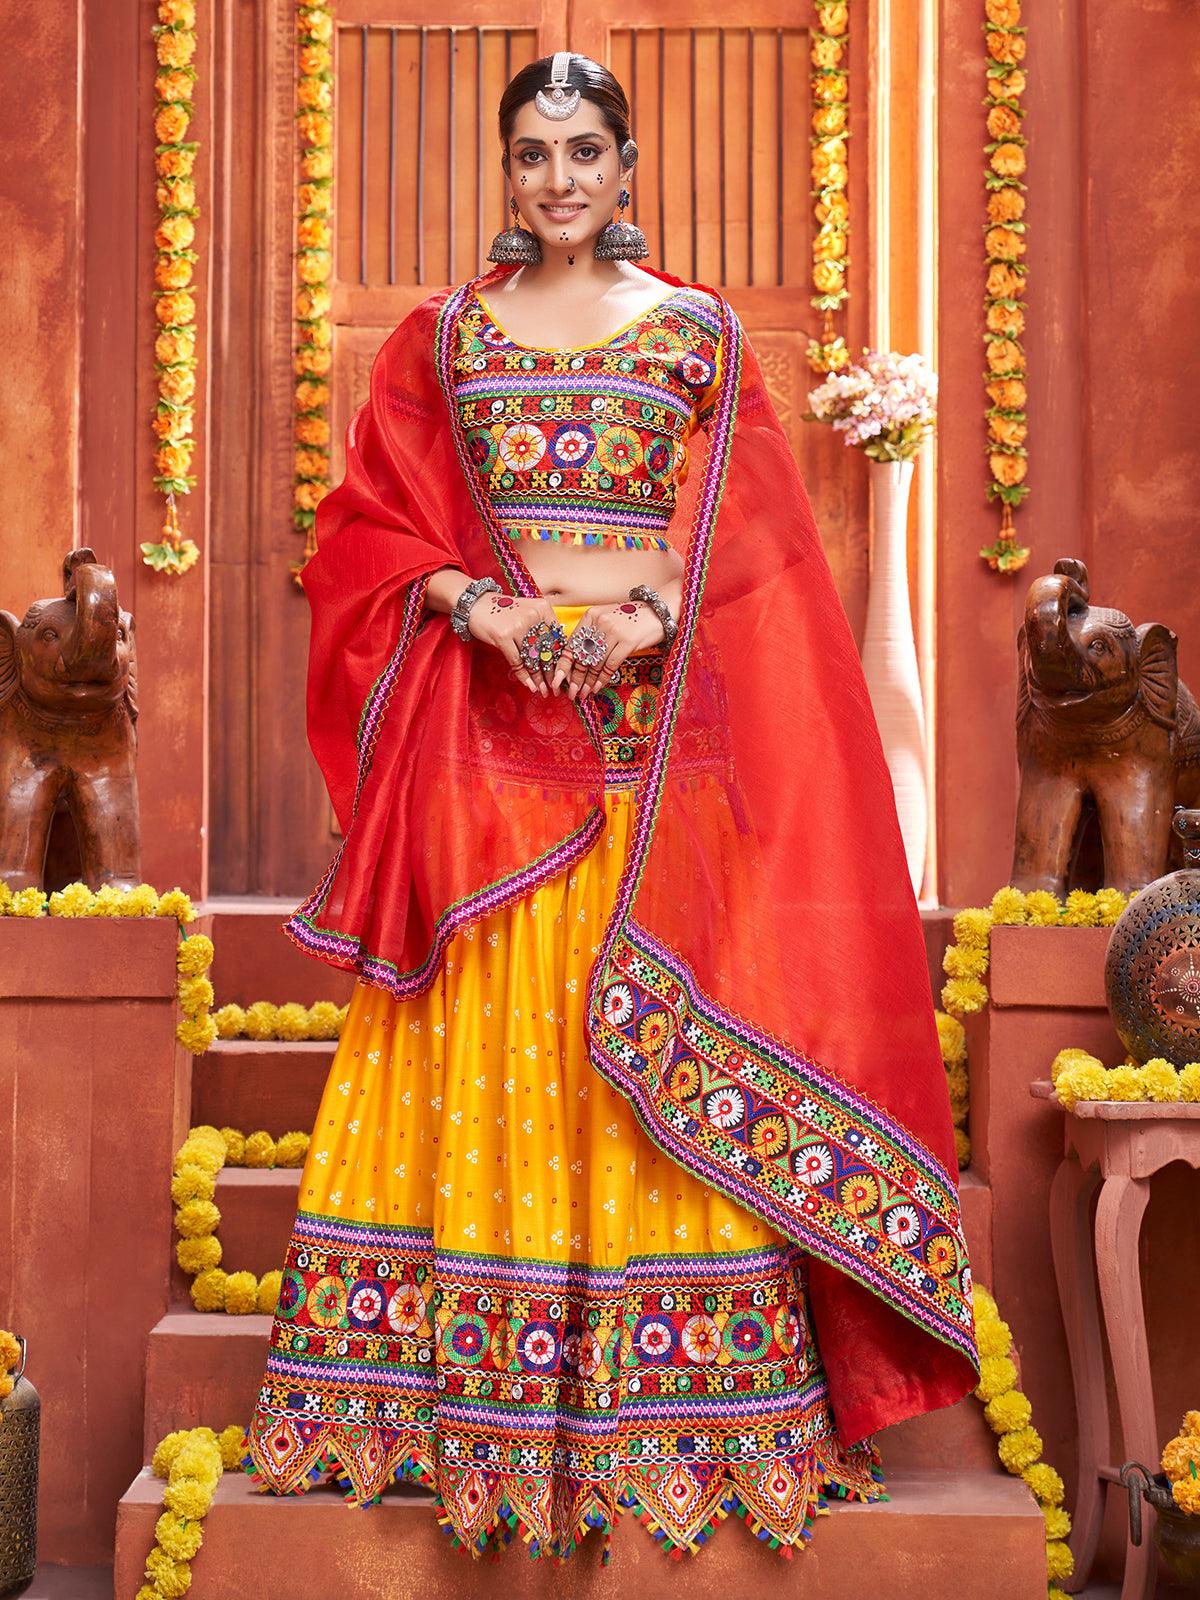 Buy Now Jurulli Yellow Mono Silk Mirror Embroidery Work Lehenga With  Unstitched Blouse For Women Wear At Arya Dress Maker